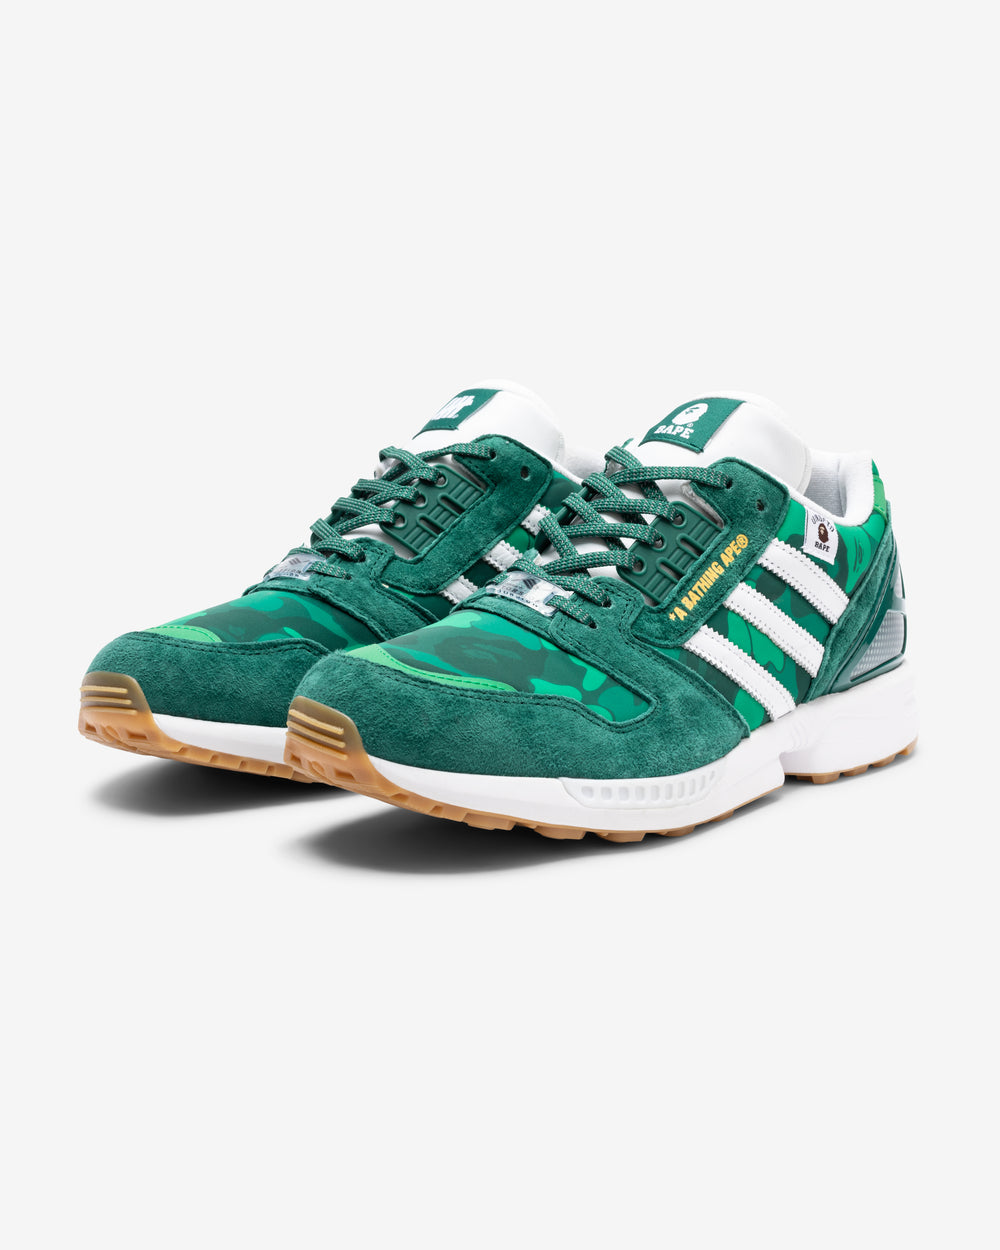 BAPE X UNDEFEATED X ADIDAS ZX 8000 - GREEN/ CWHITE/ GUM – Undefeated